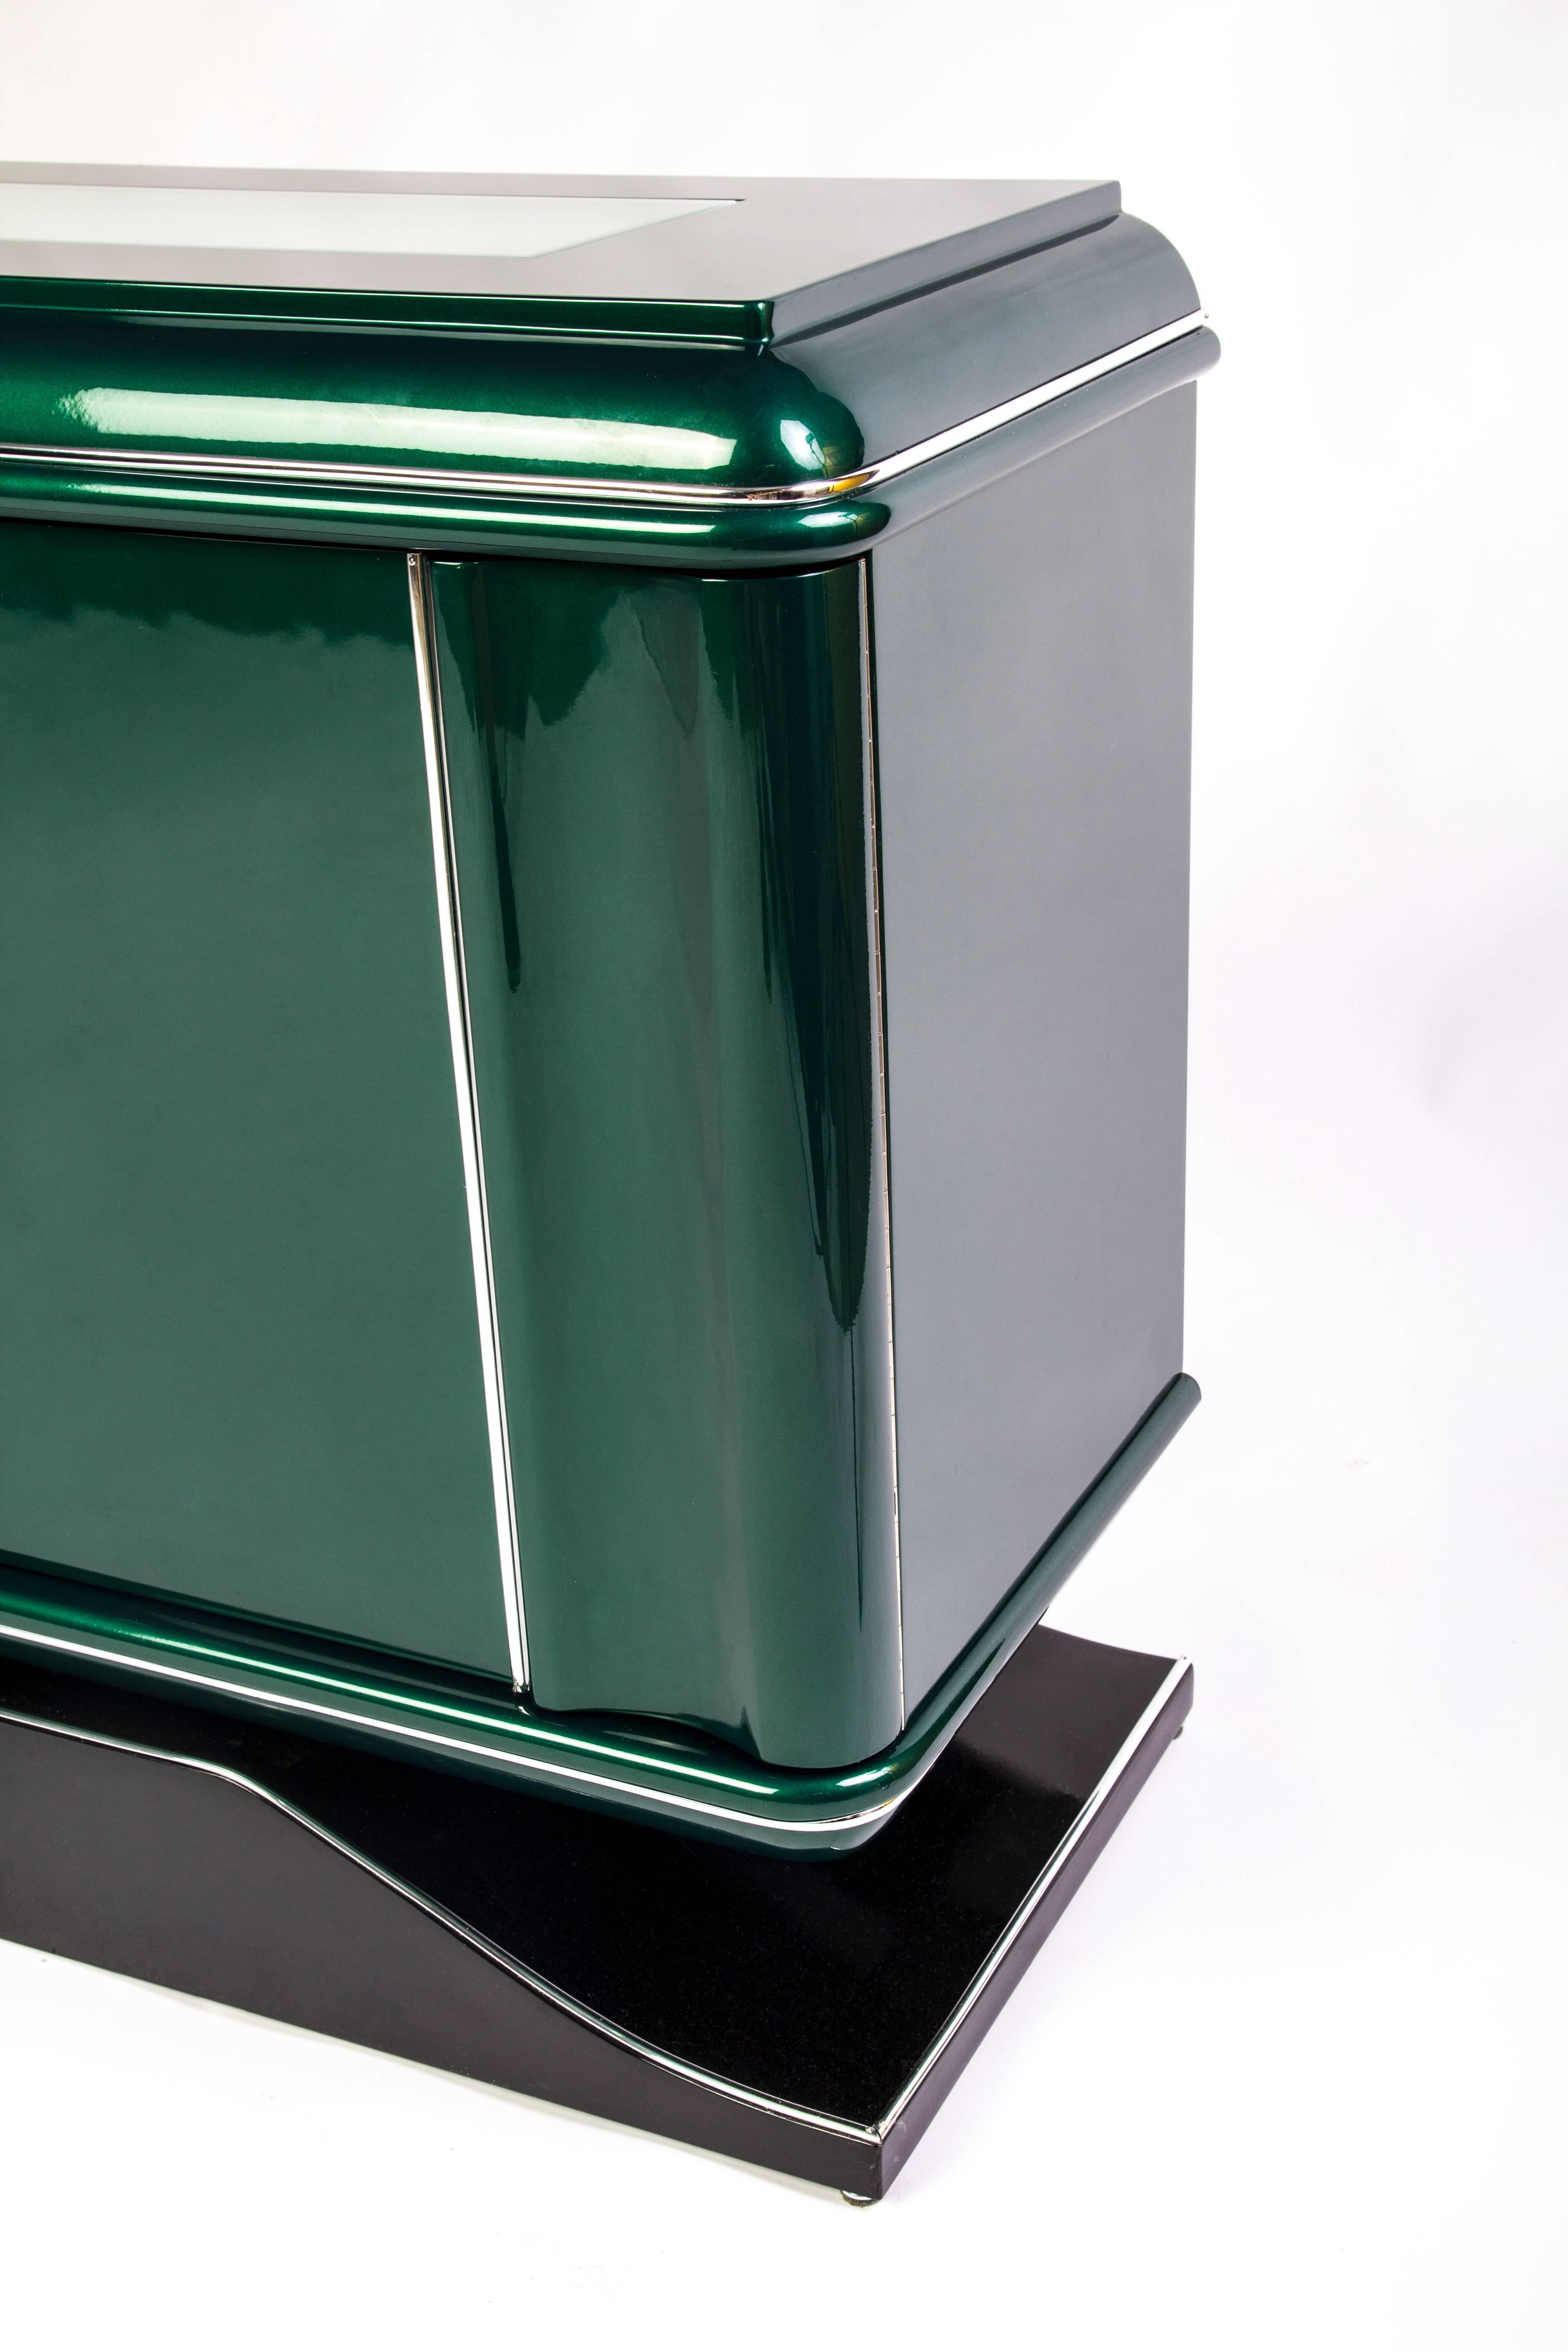 This extraordinary Art Deco commode features a built in translucent light that reflects on the top and interior of this piece, with an evergreen high gloss lacquer finish. It has a French foot base with chrome lines and fixtures, finished in a high